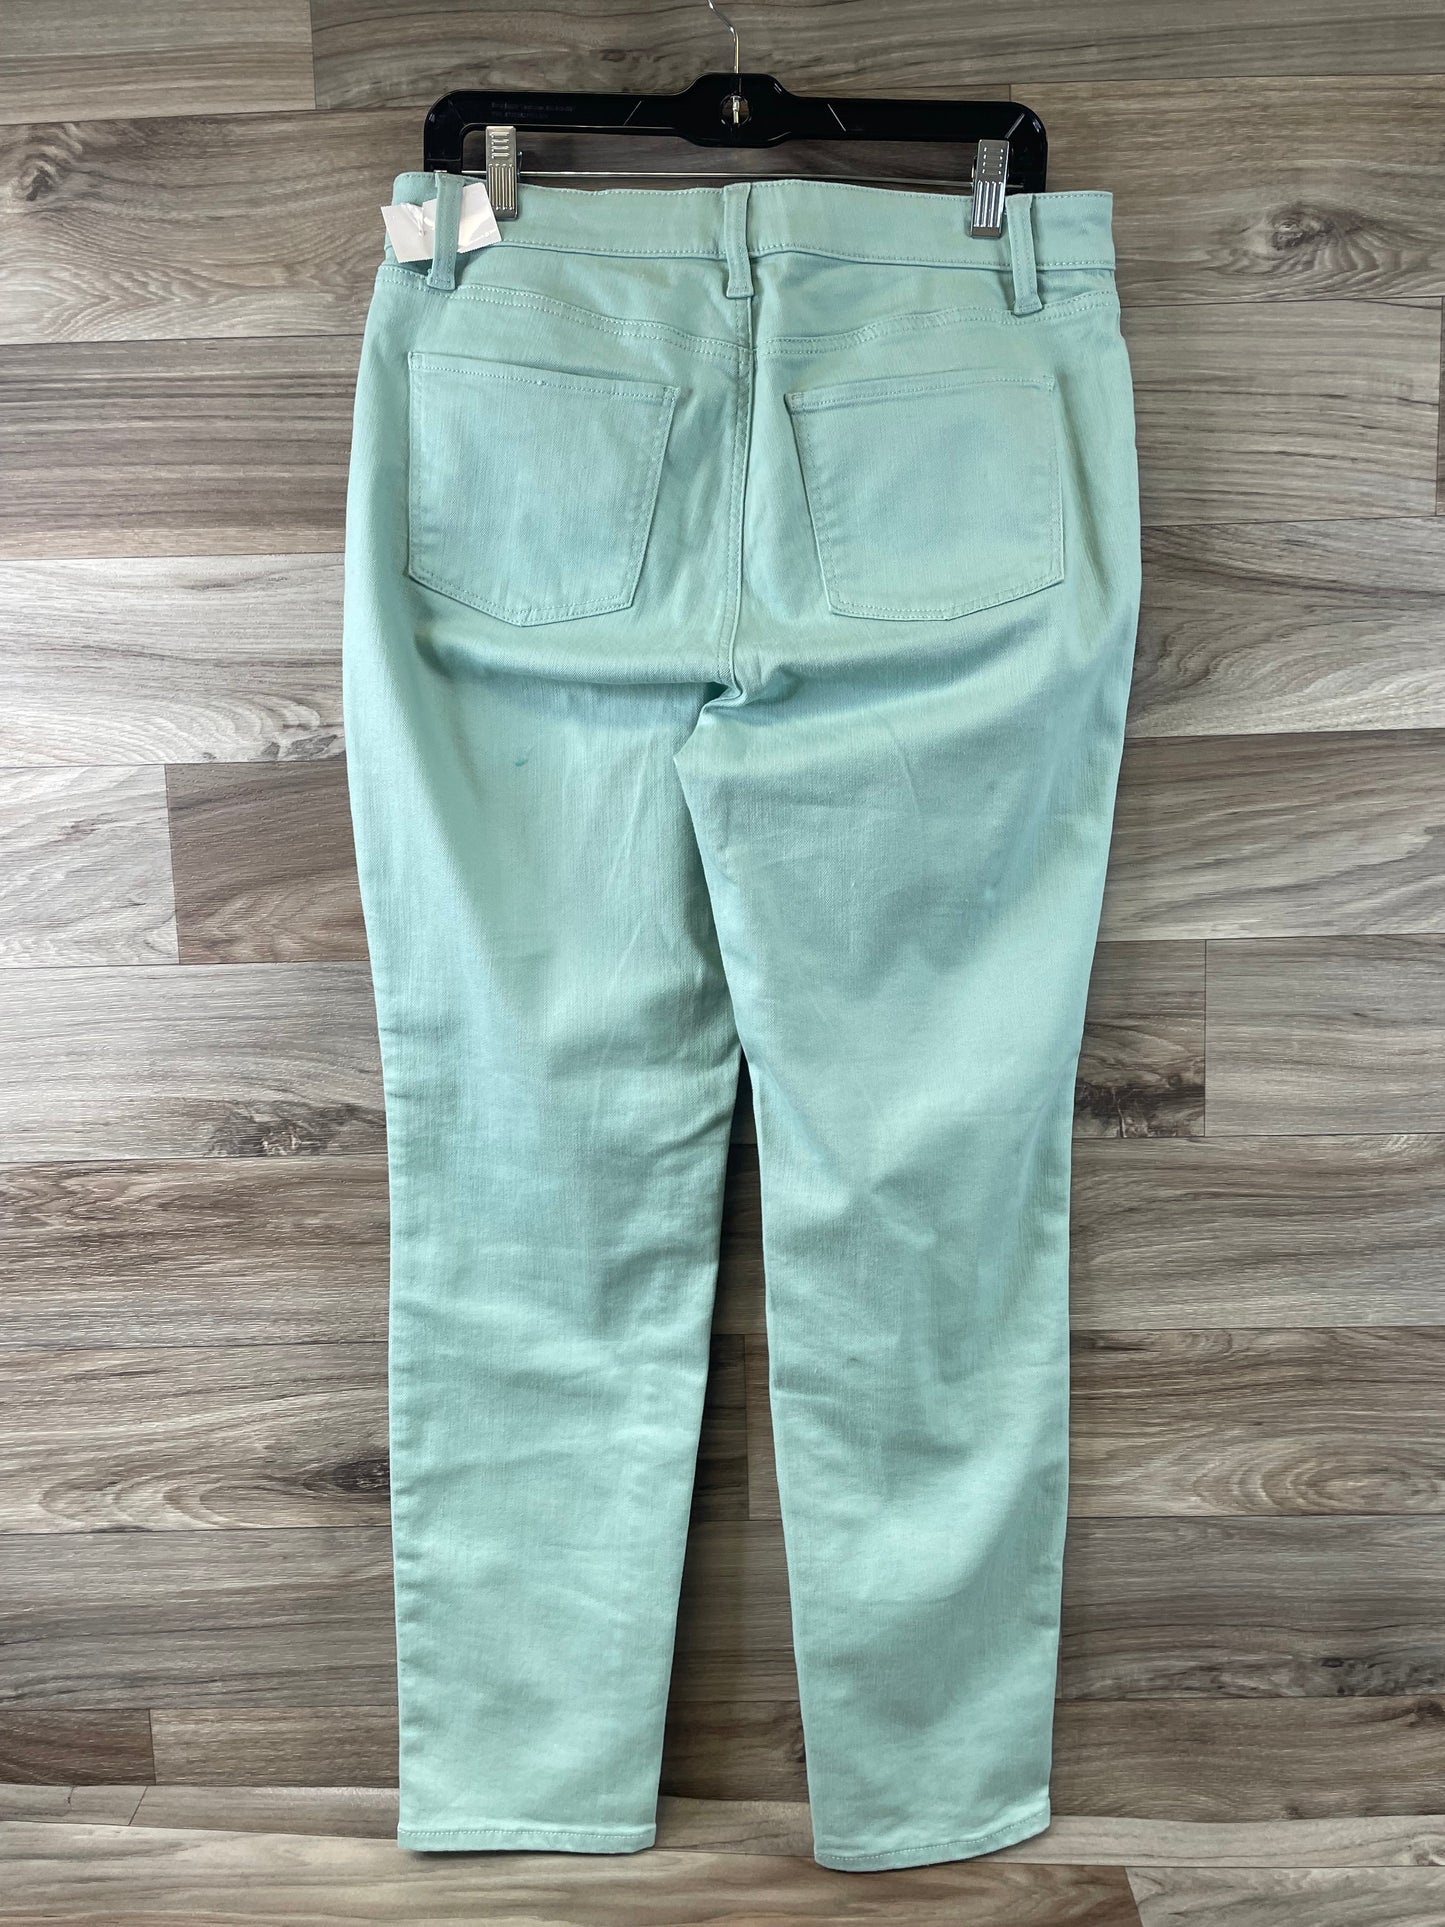 Green Jeans Straight Talbots, Size 10